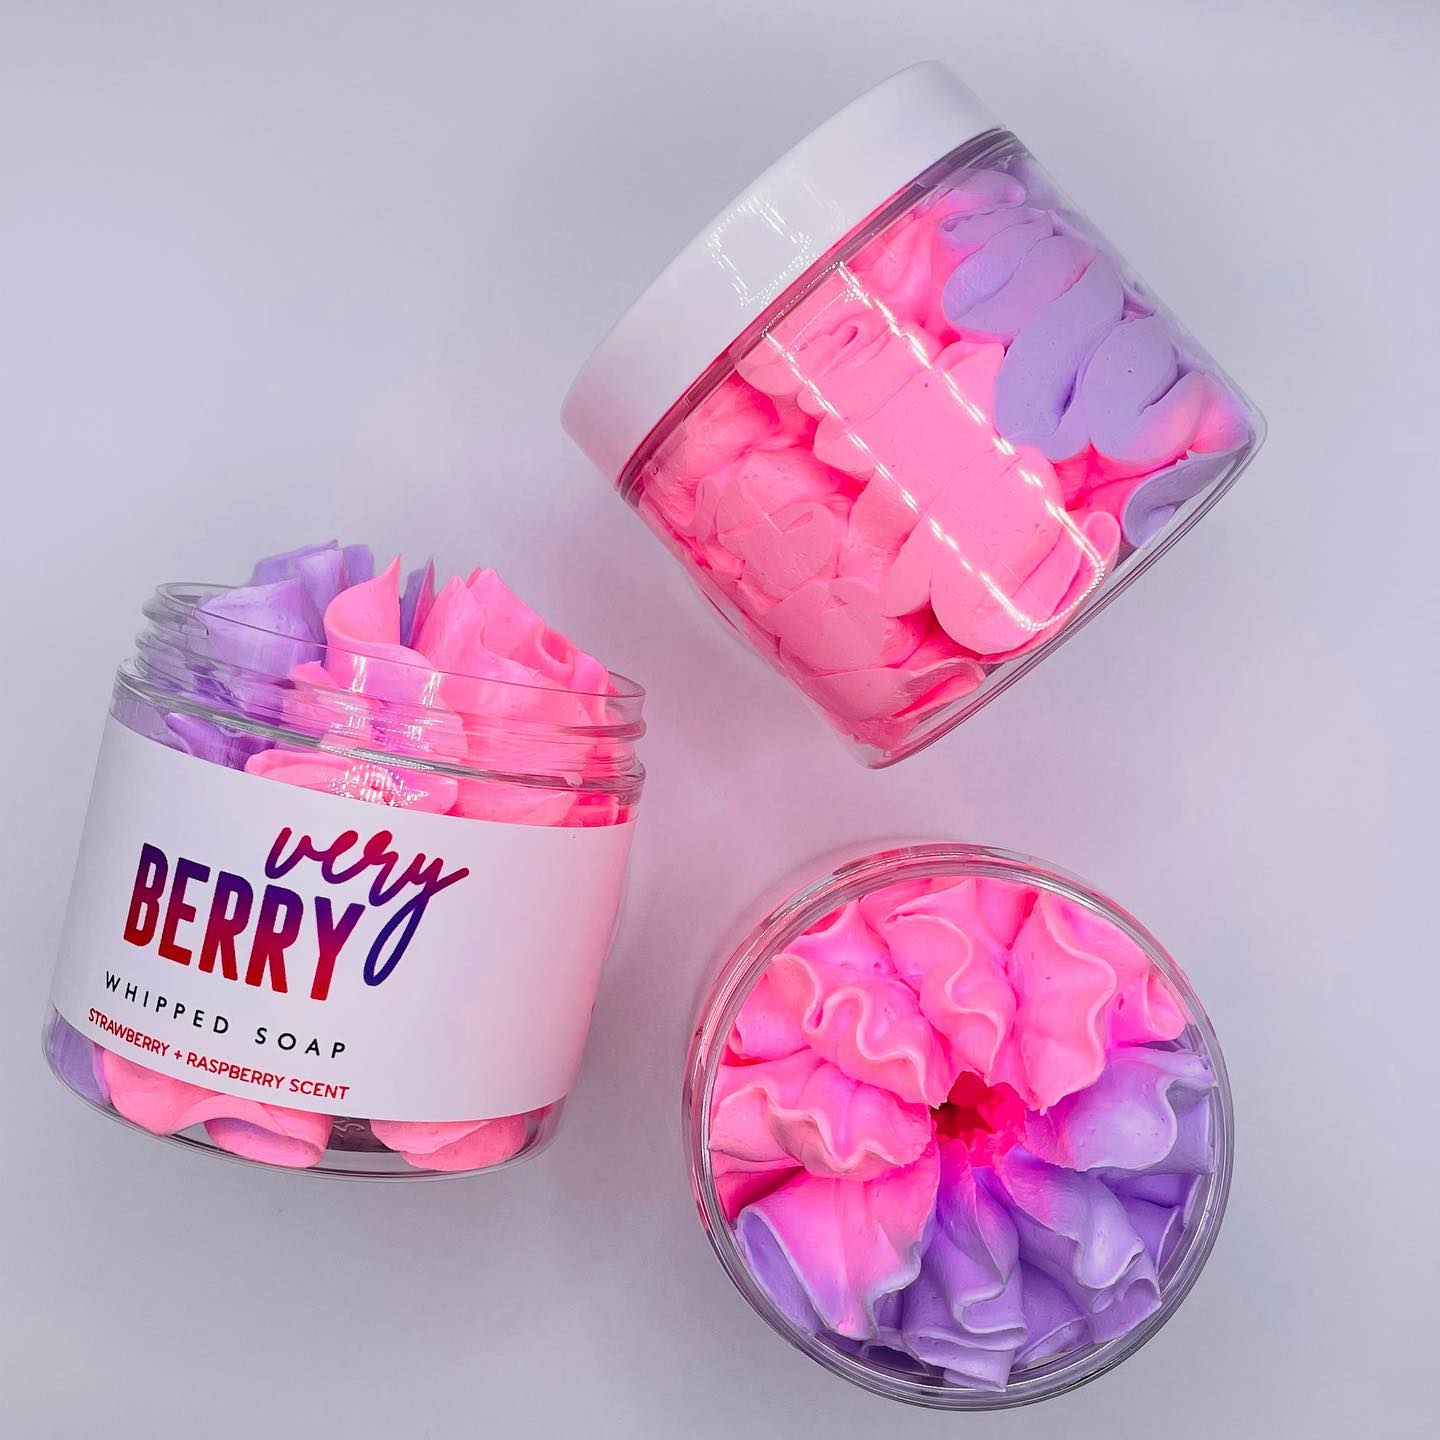 Very Berry Whipped Soap - Erne Deals